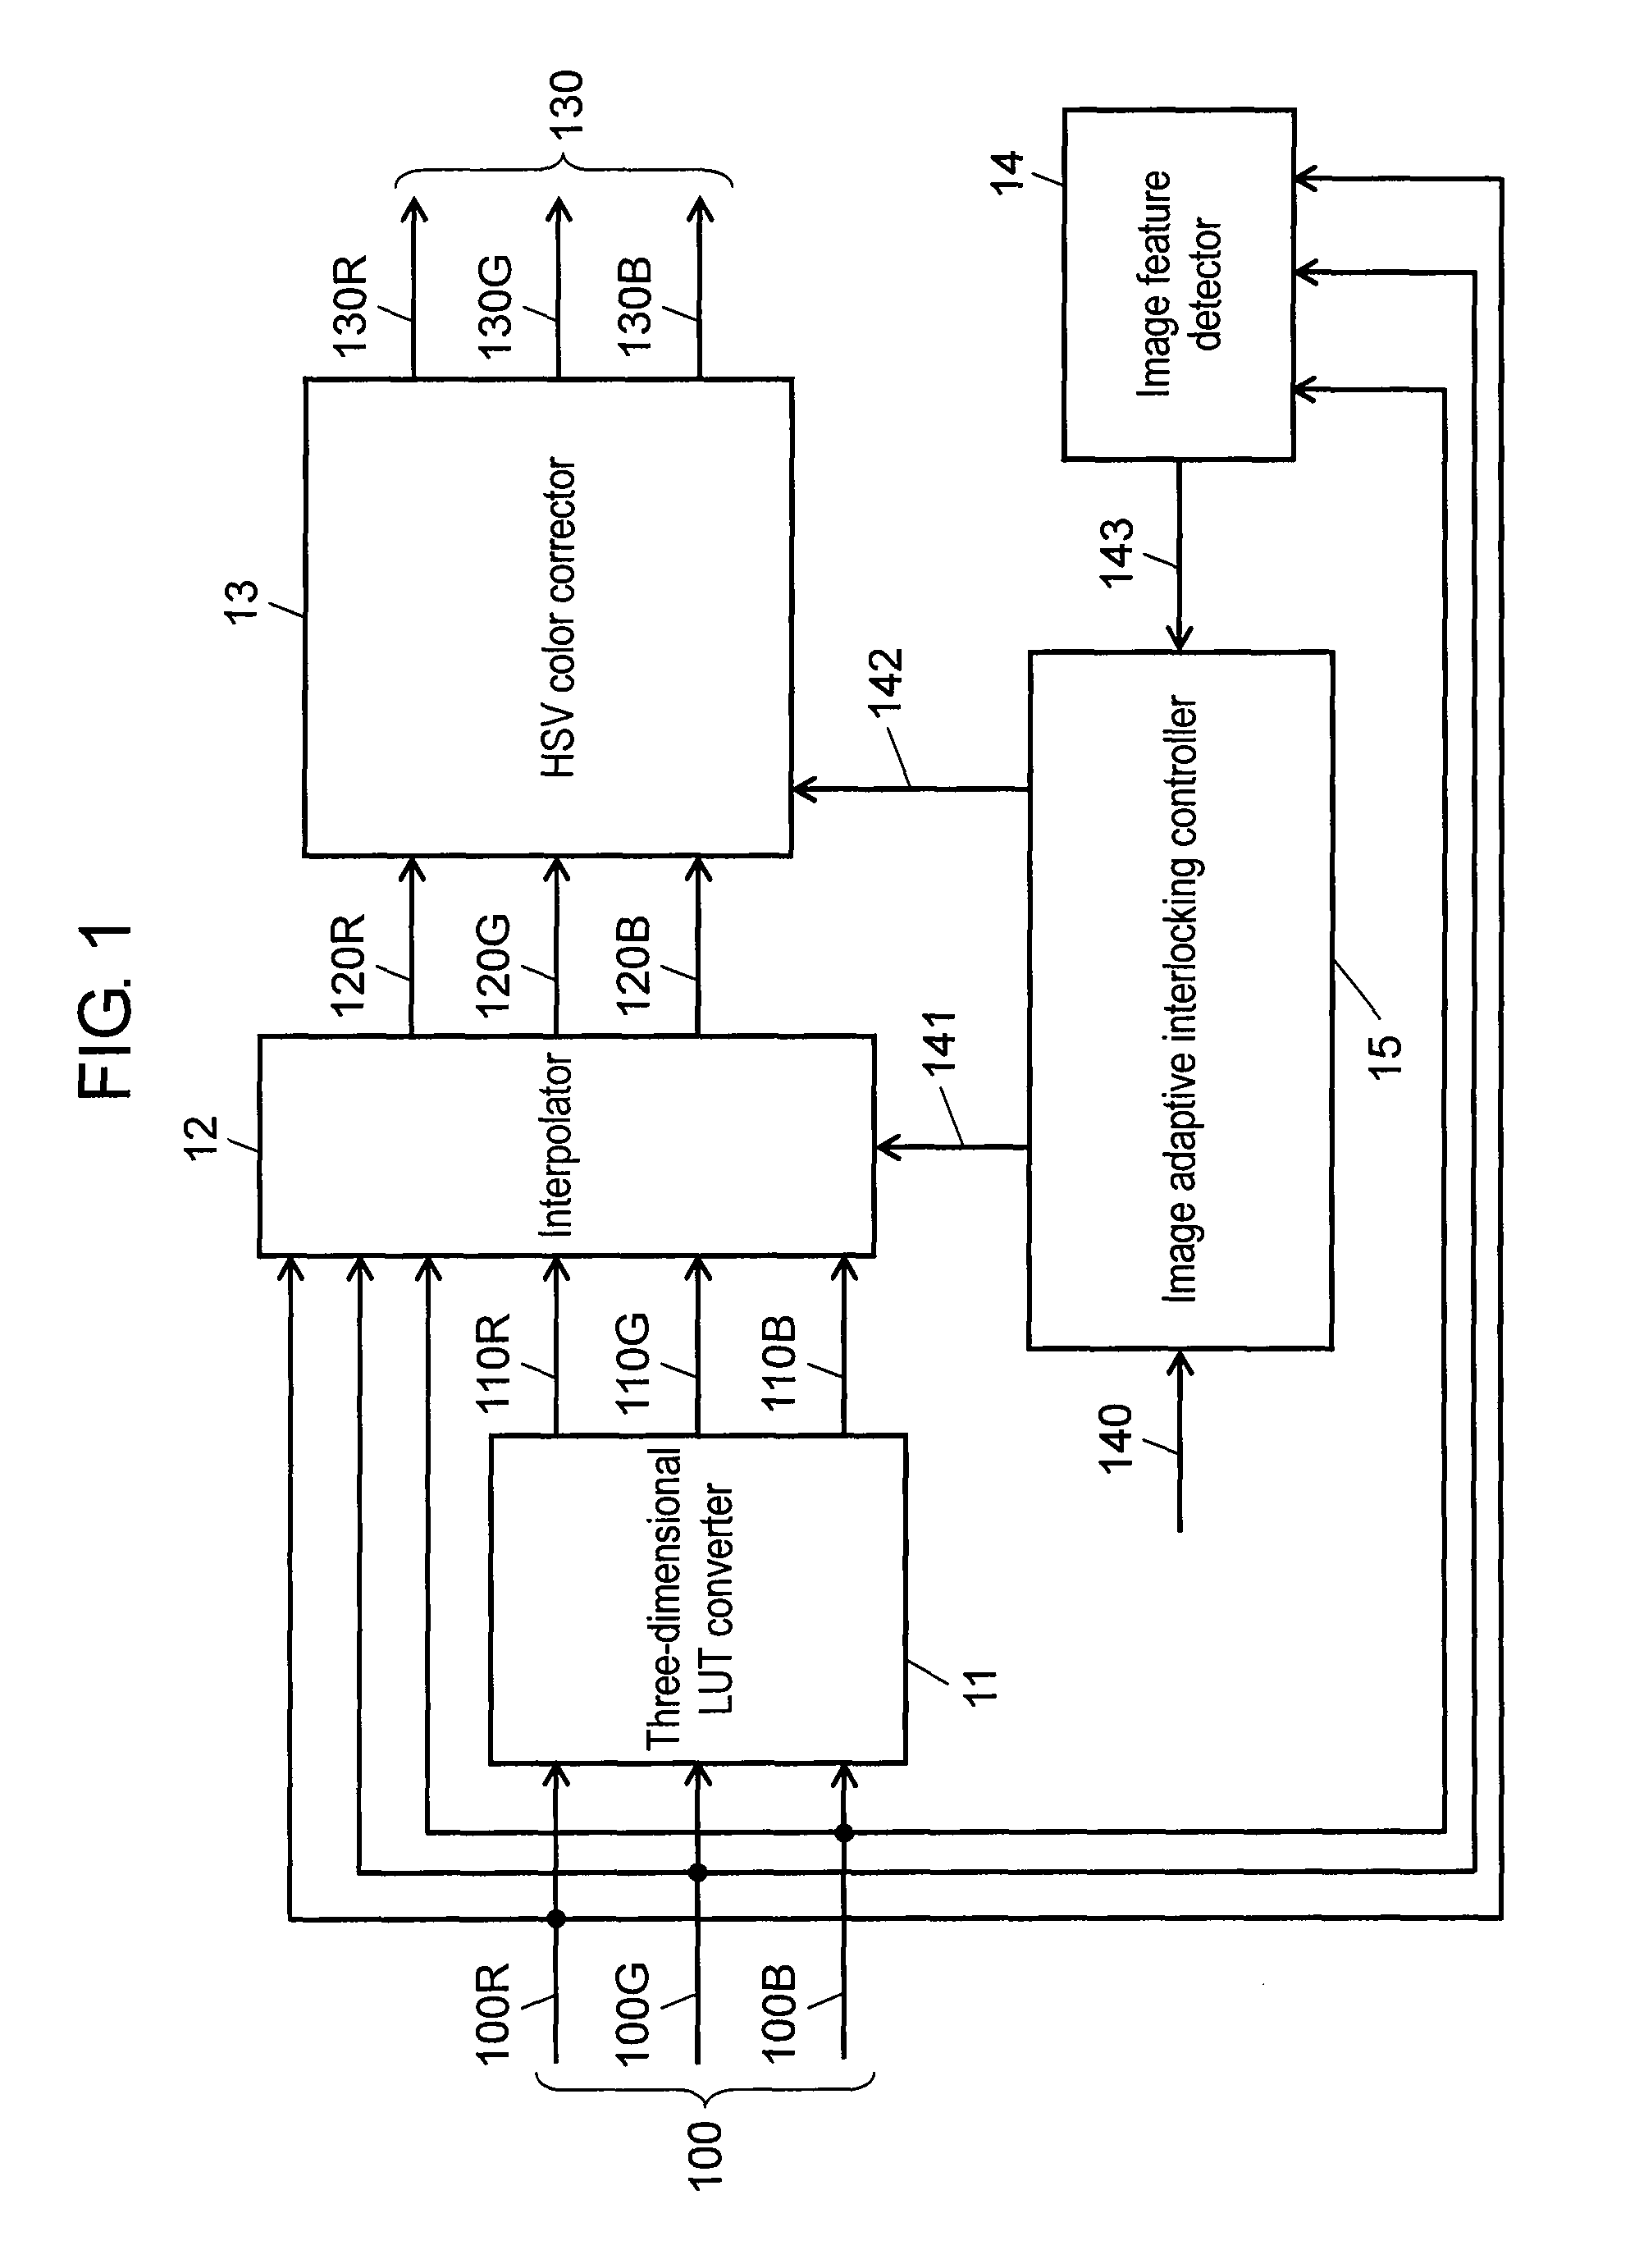 Color management module, color management apparatus, integrated circuit, display unit, and method of color management